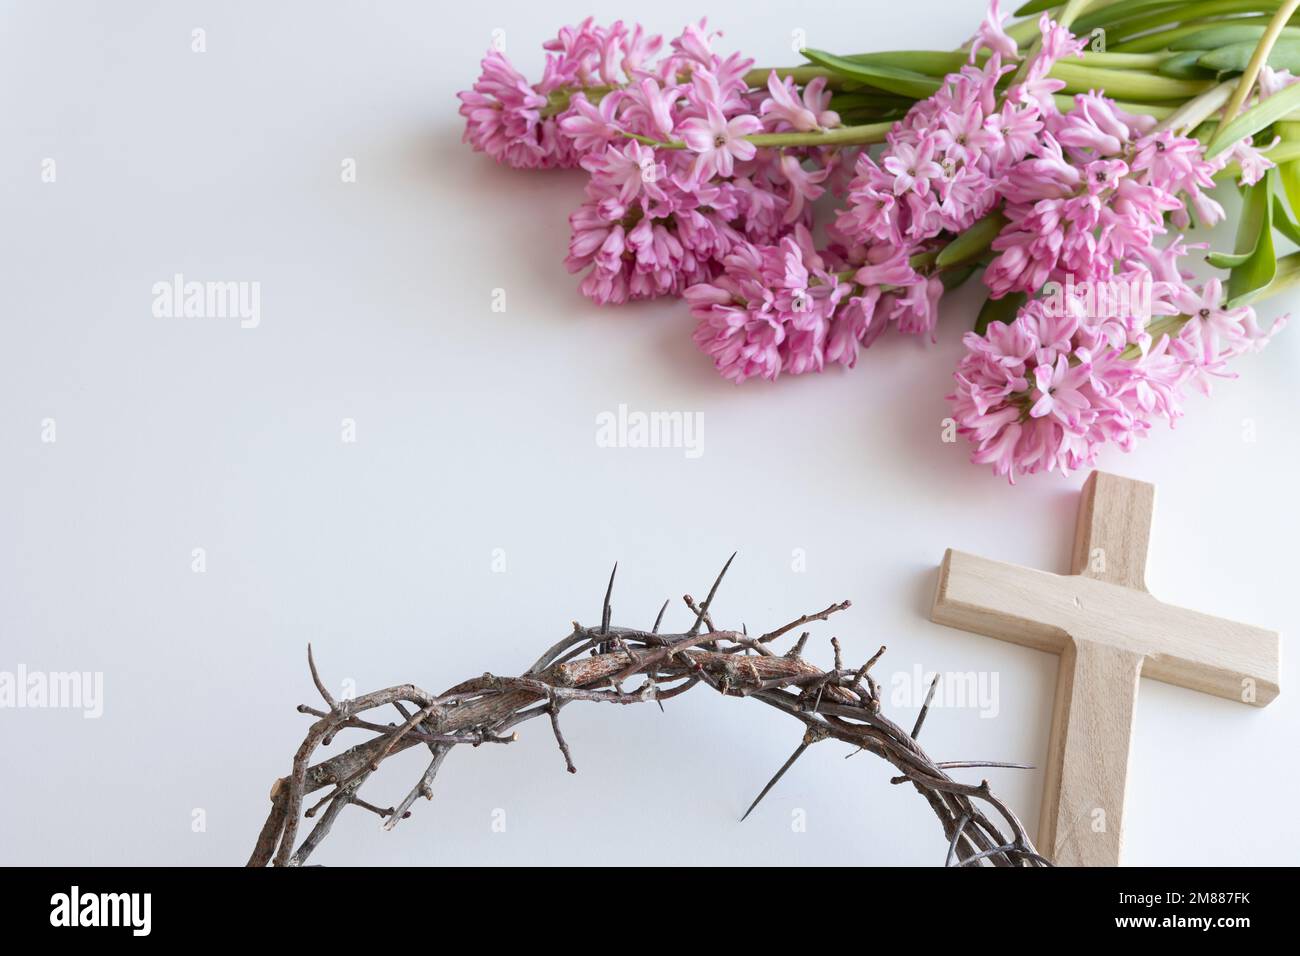 Simple wood cross and crown of thorns with pink hyacinth flowers on a white background with copy space Stock Photo